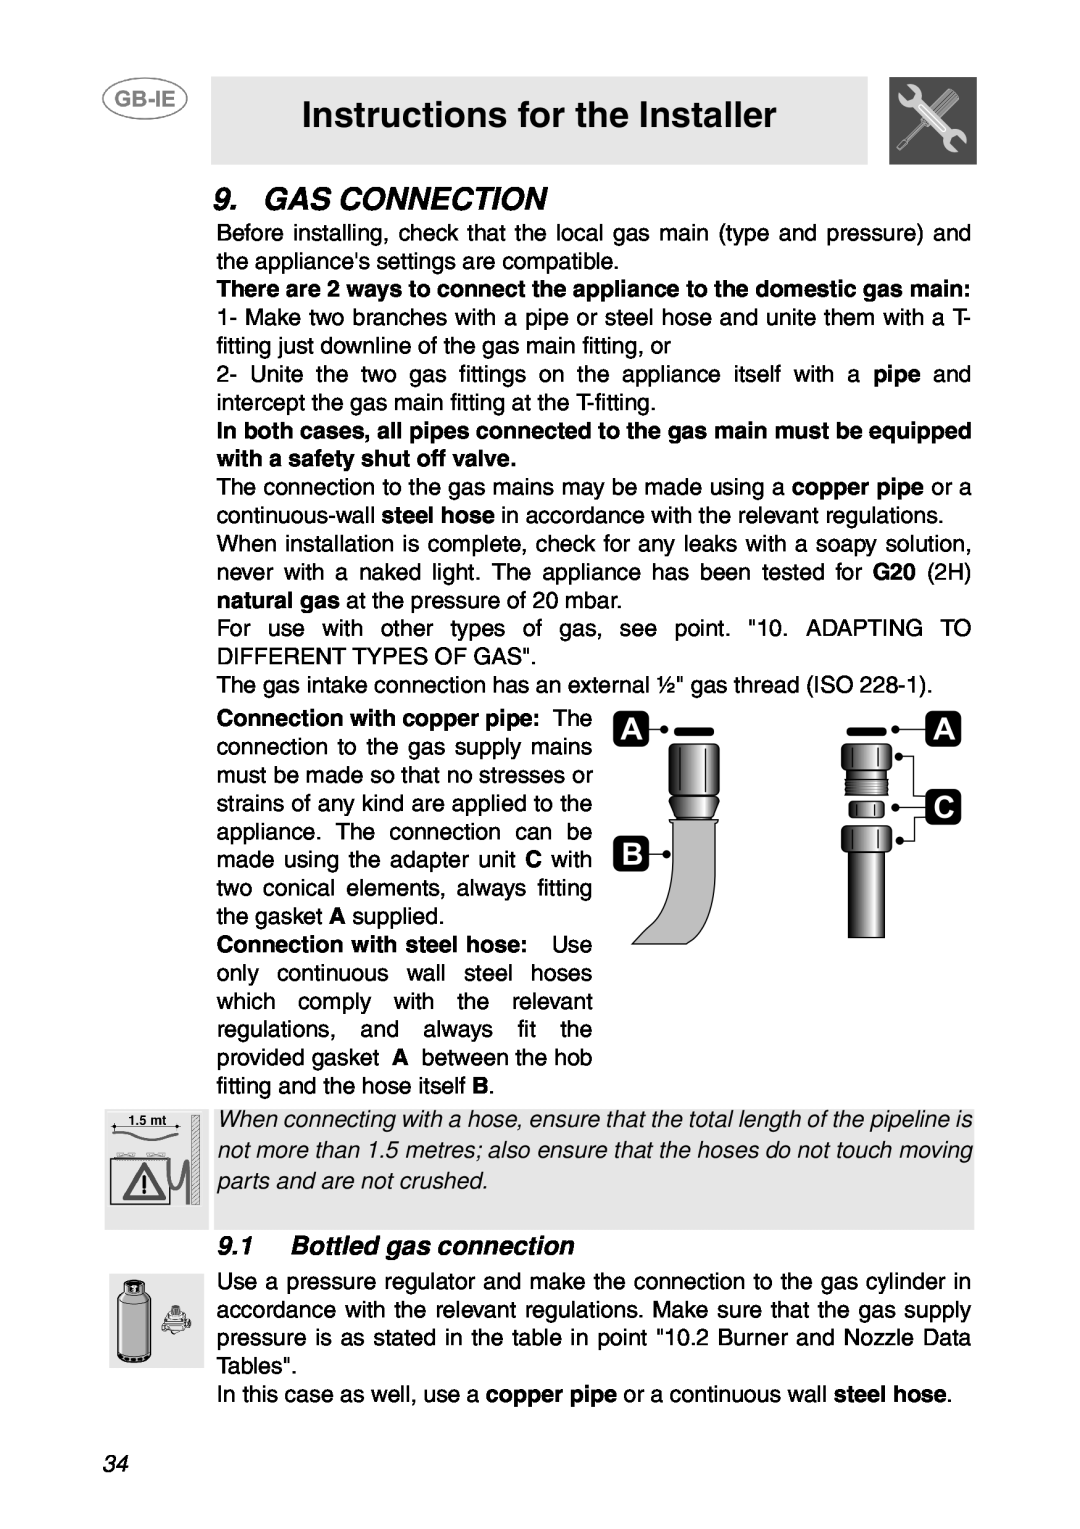 Smeg GD100XG manual Gas Connection, Bottled gas connection, Instructions for the Installer 